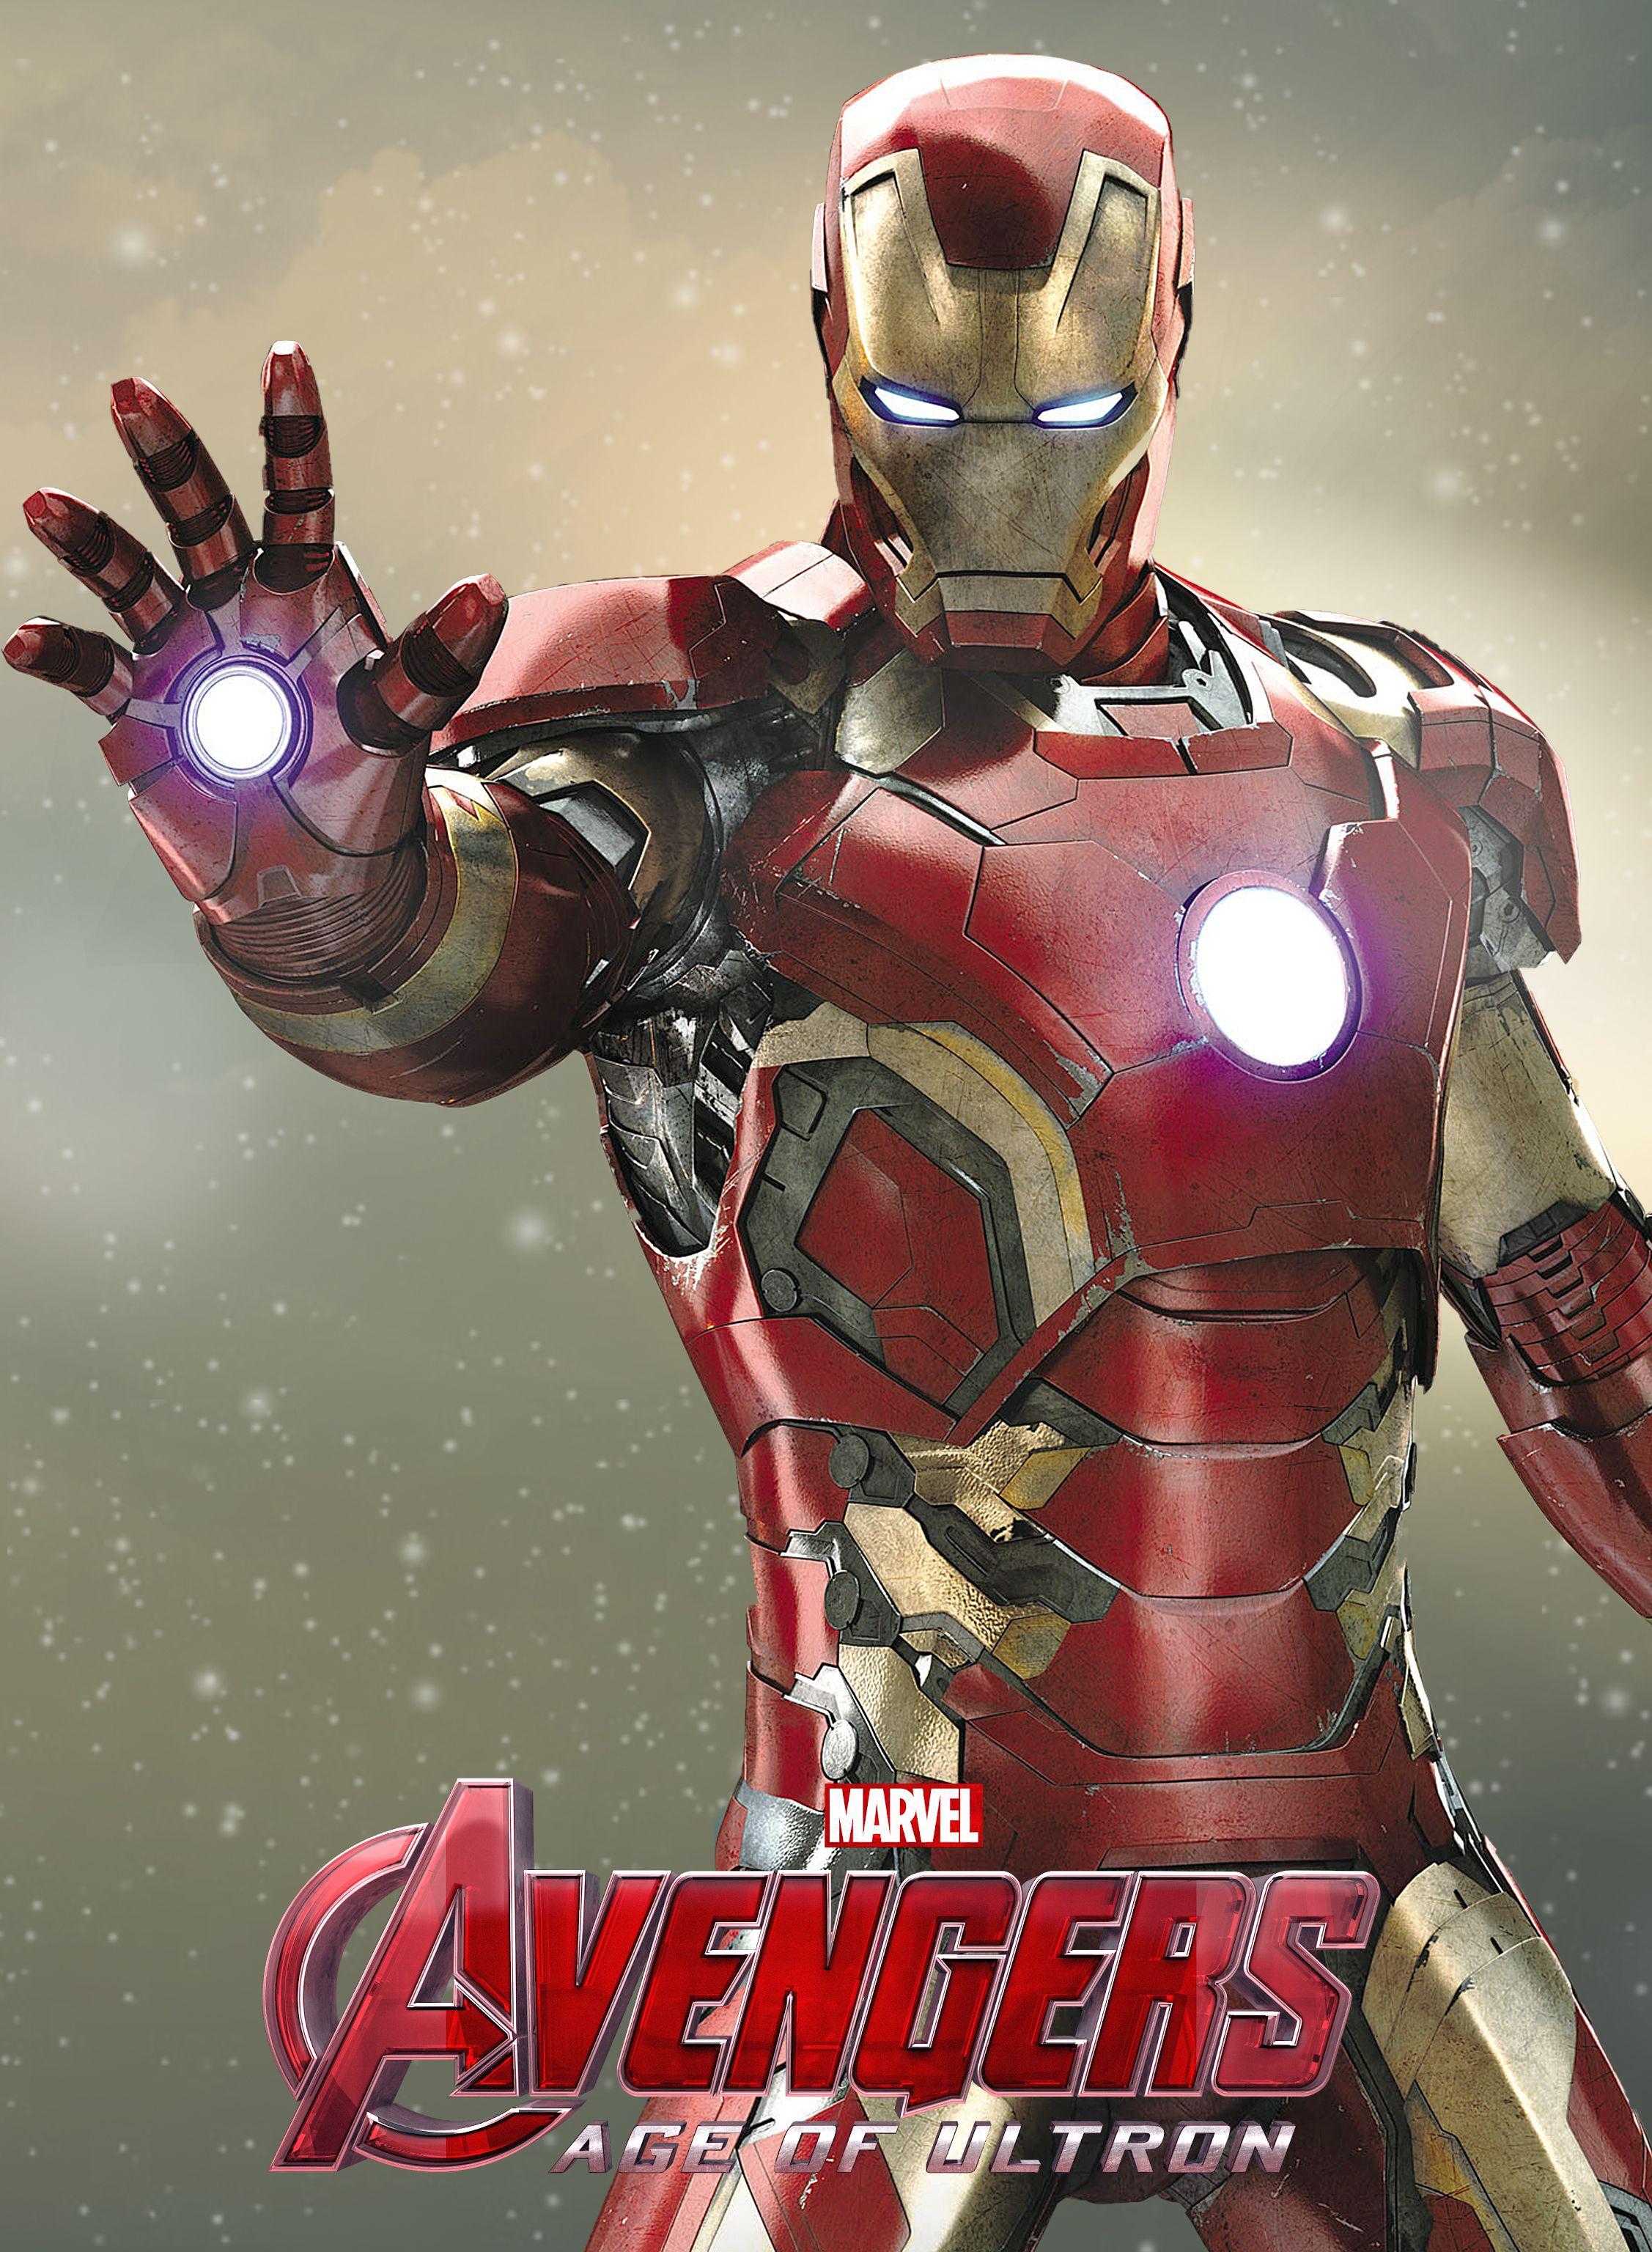 Avengers Age of Ultron: Iron Man Poster